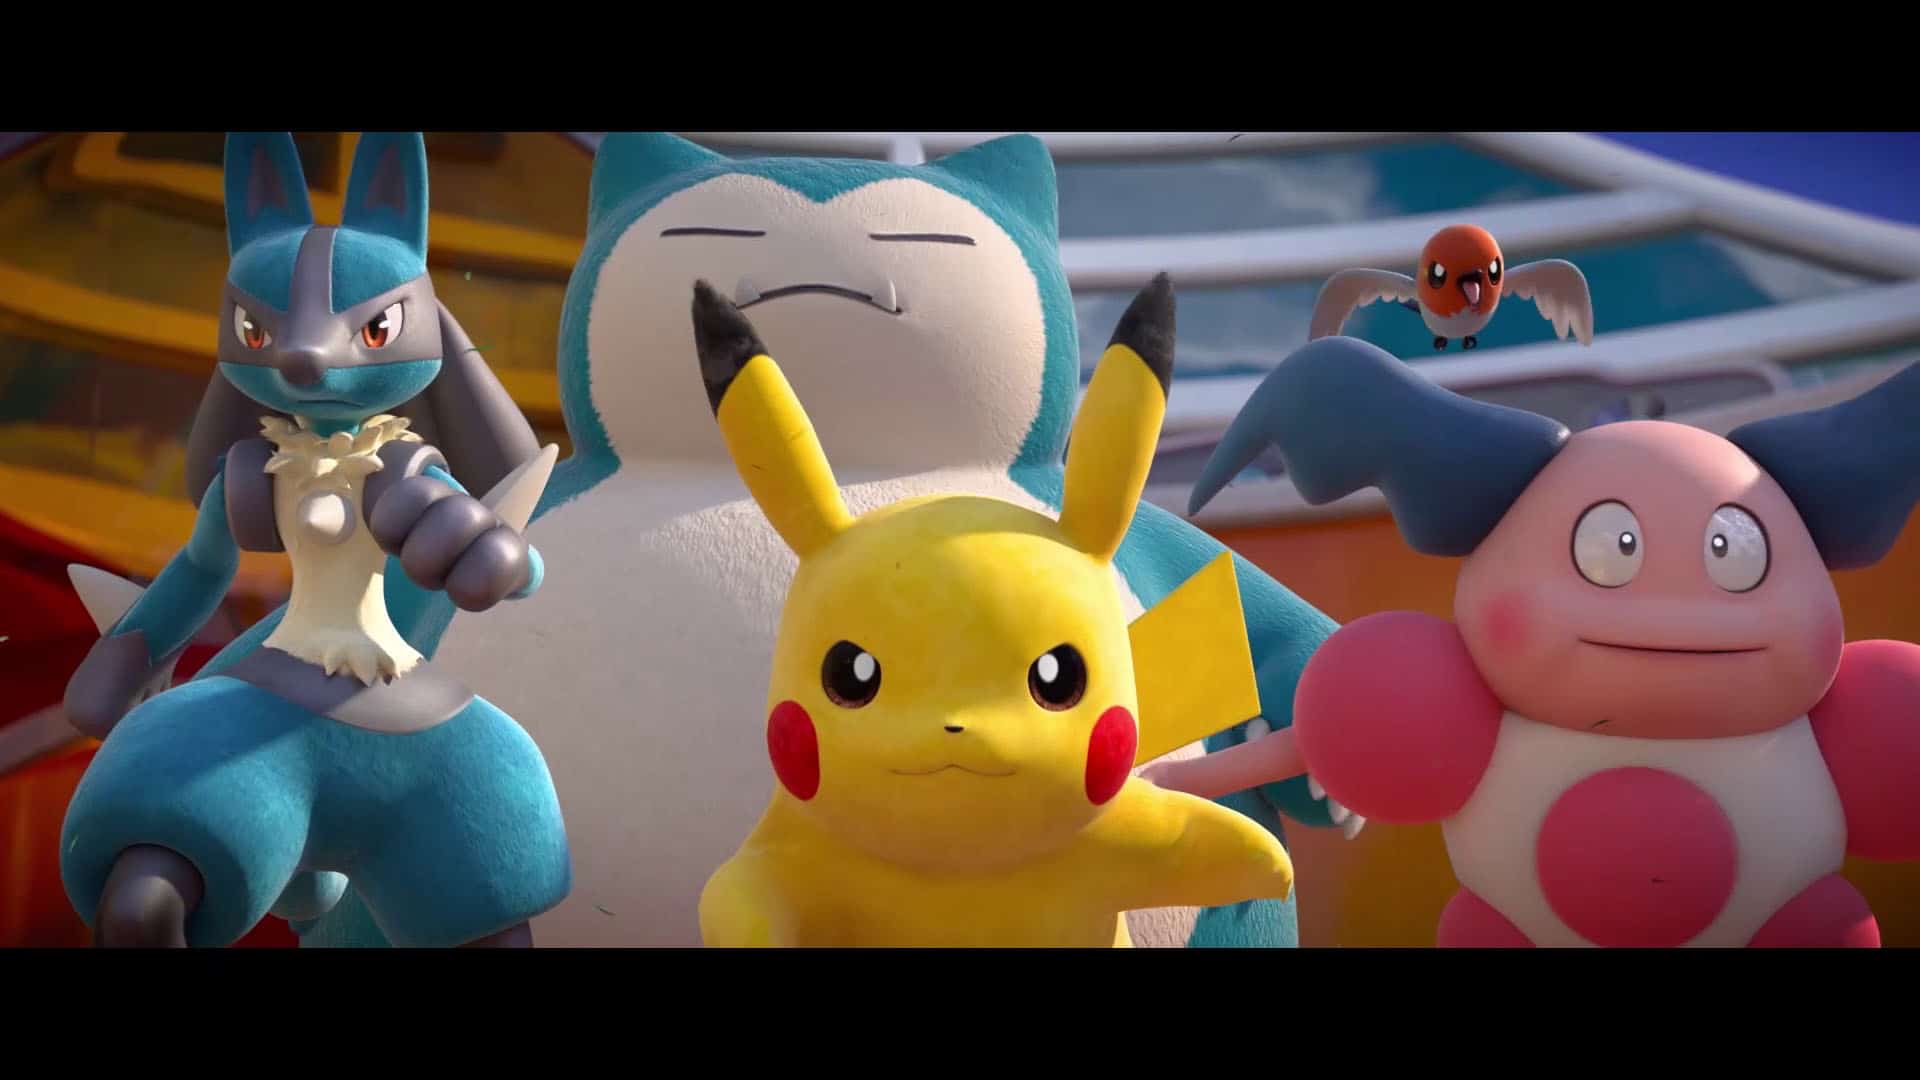 Pokémon Unite launches on Nintendo Switch this July